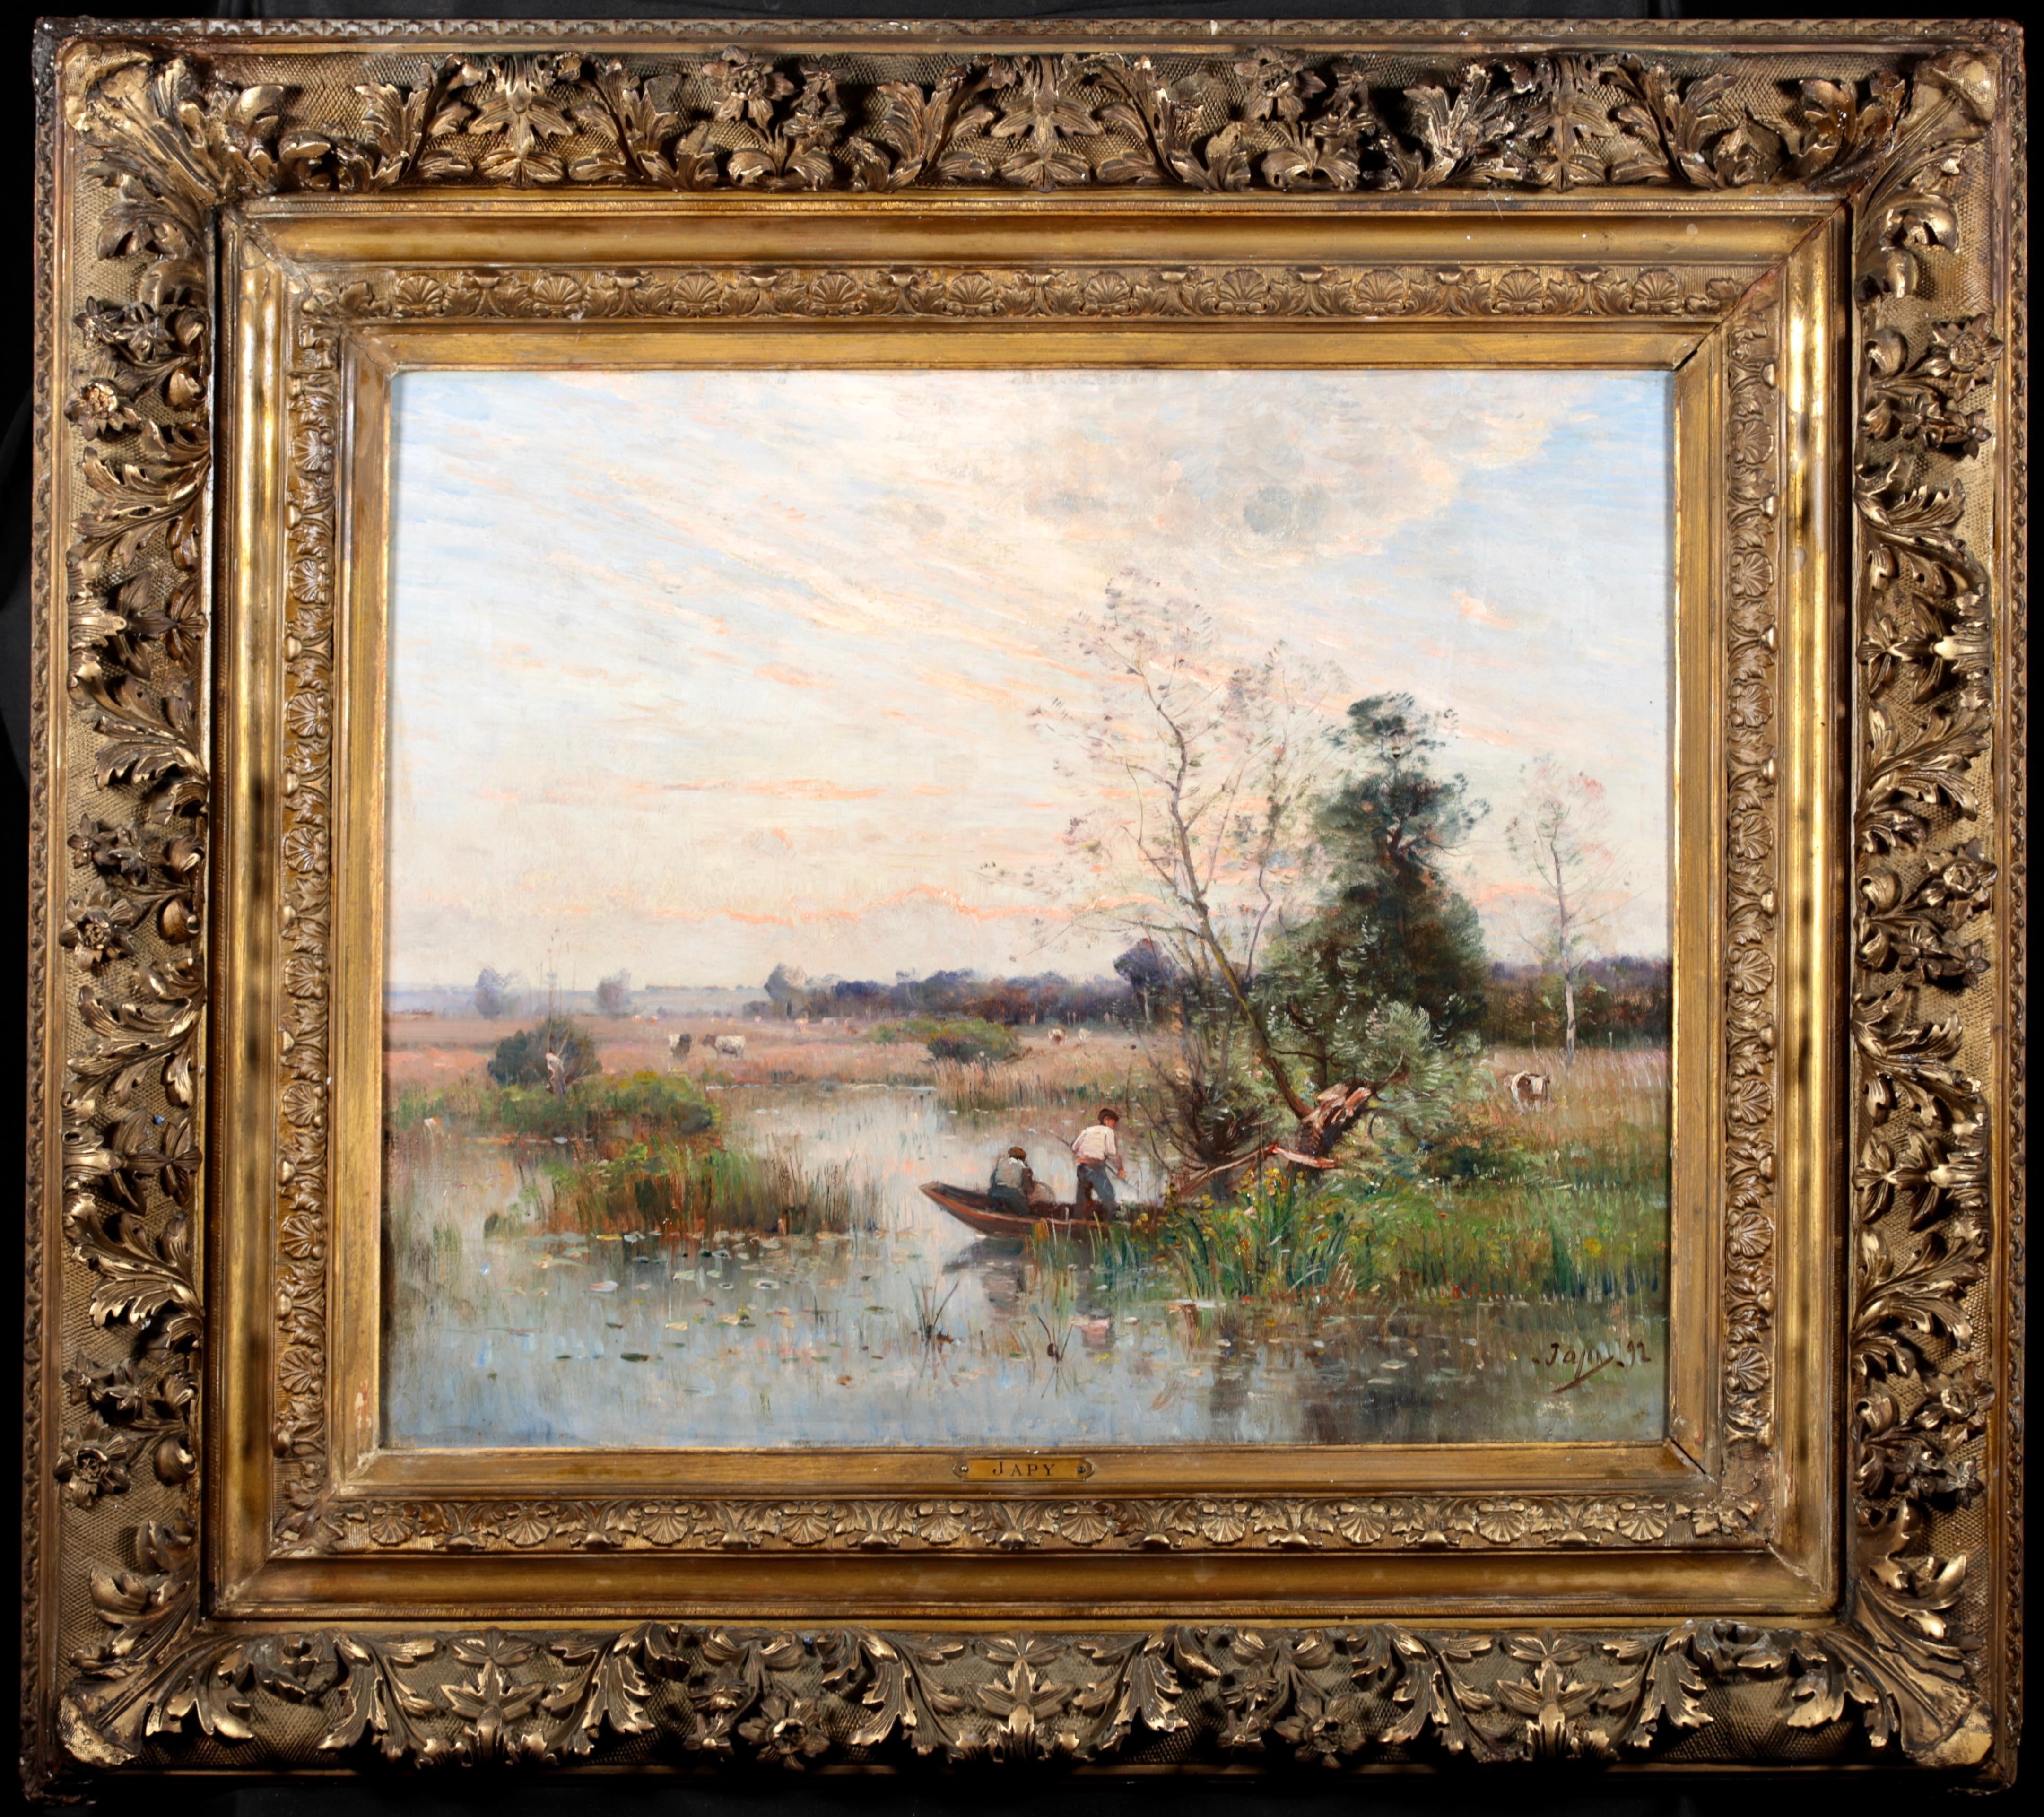 Fishing on a River - Impressionist Oil, Boat on River Landscape by Louis Japy - Painting by Louis Aimé Japy